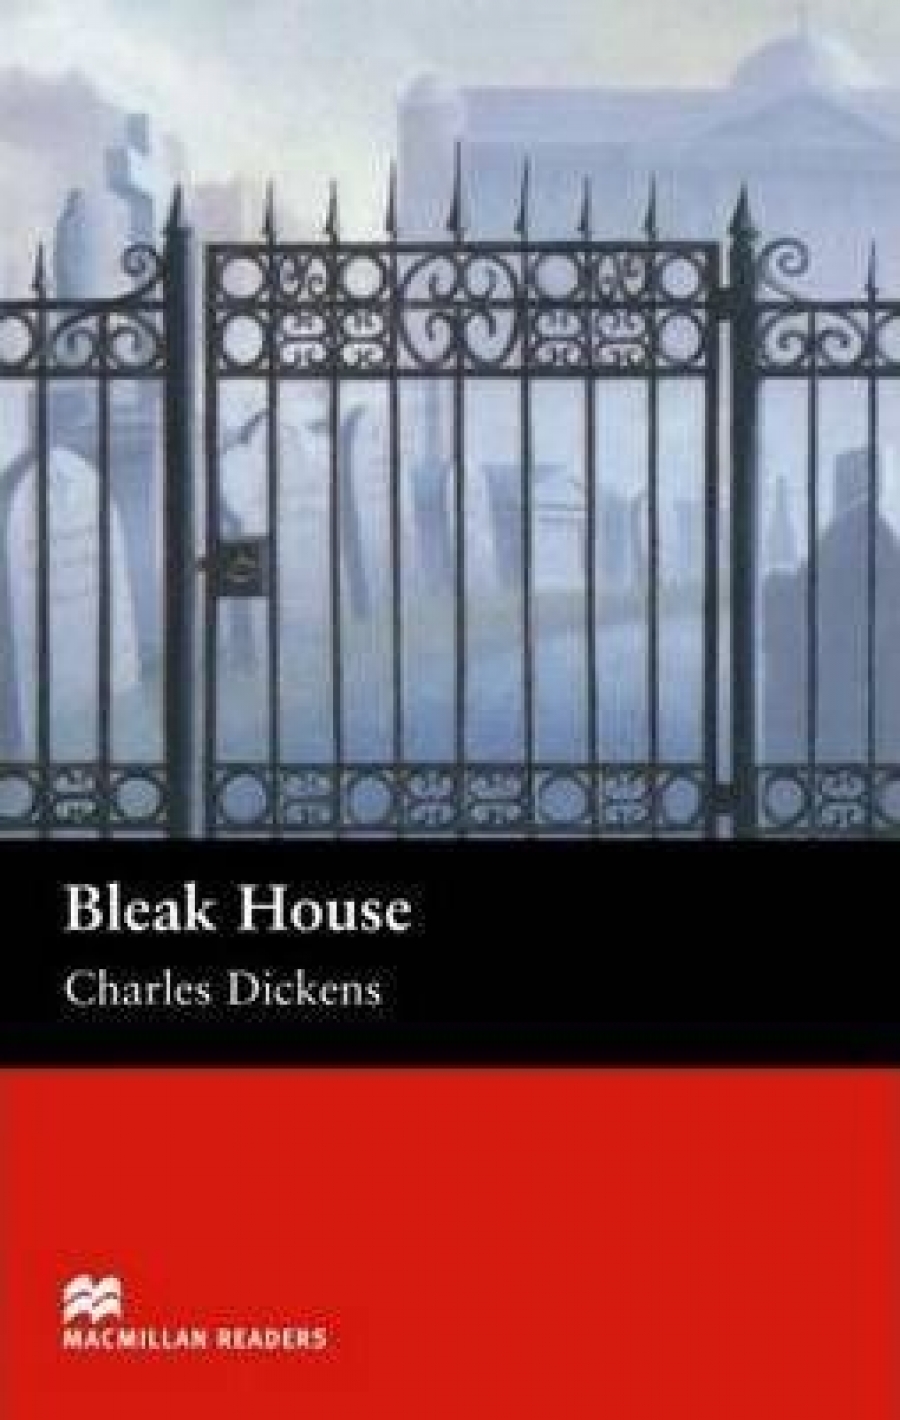 Charles Dickens, retold by Florence Bell Bleak House 